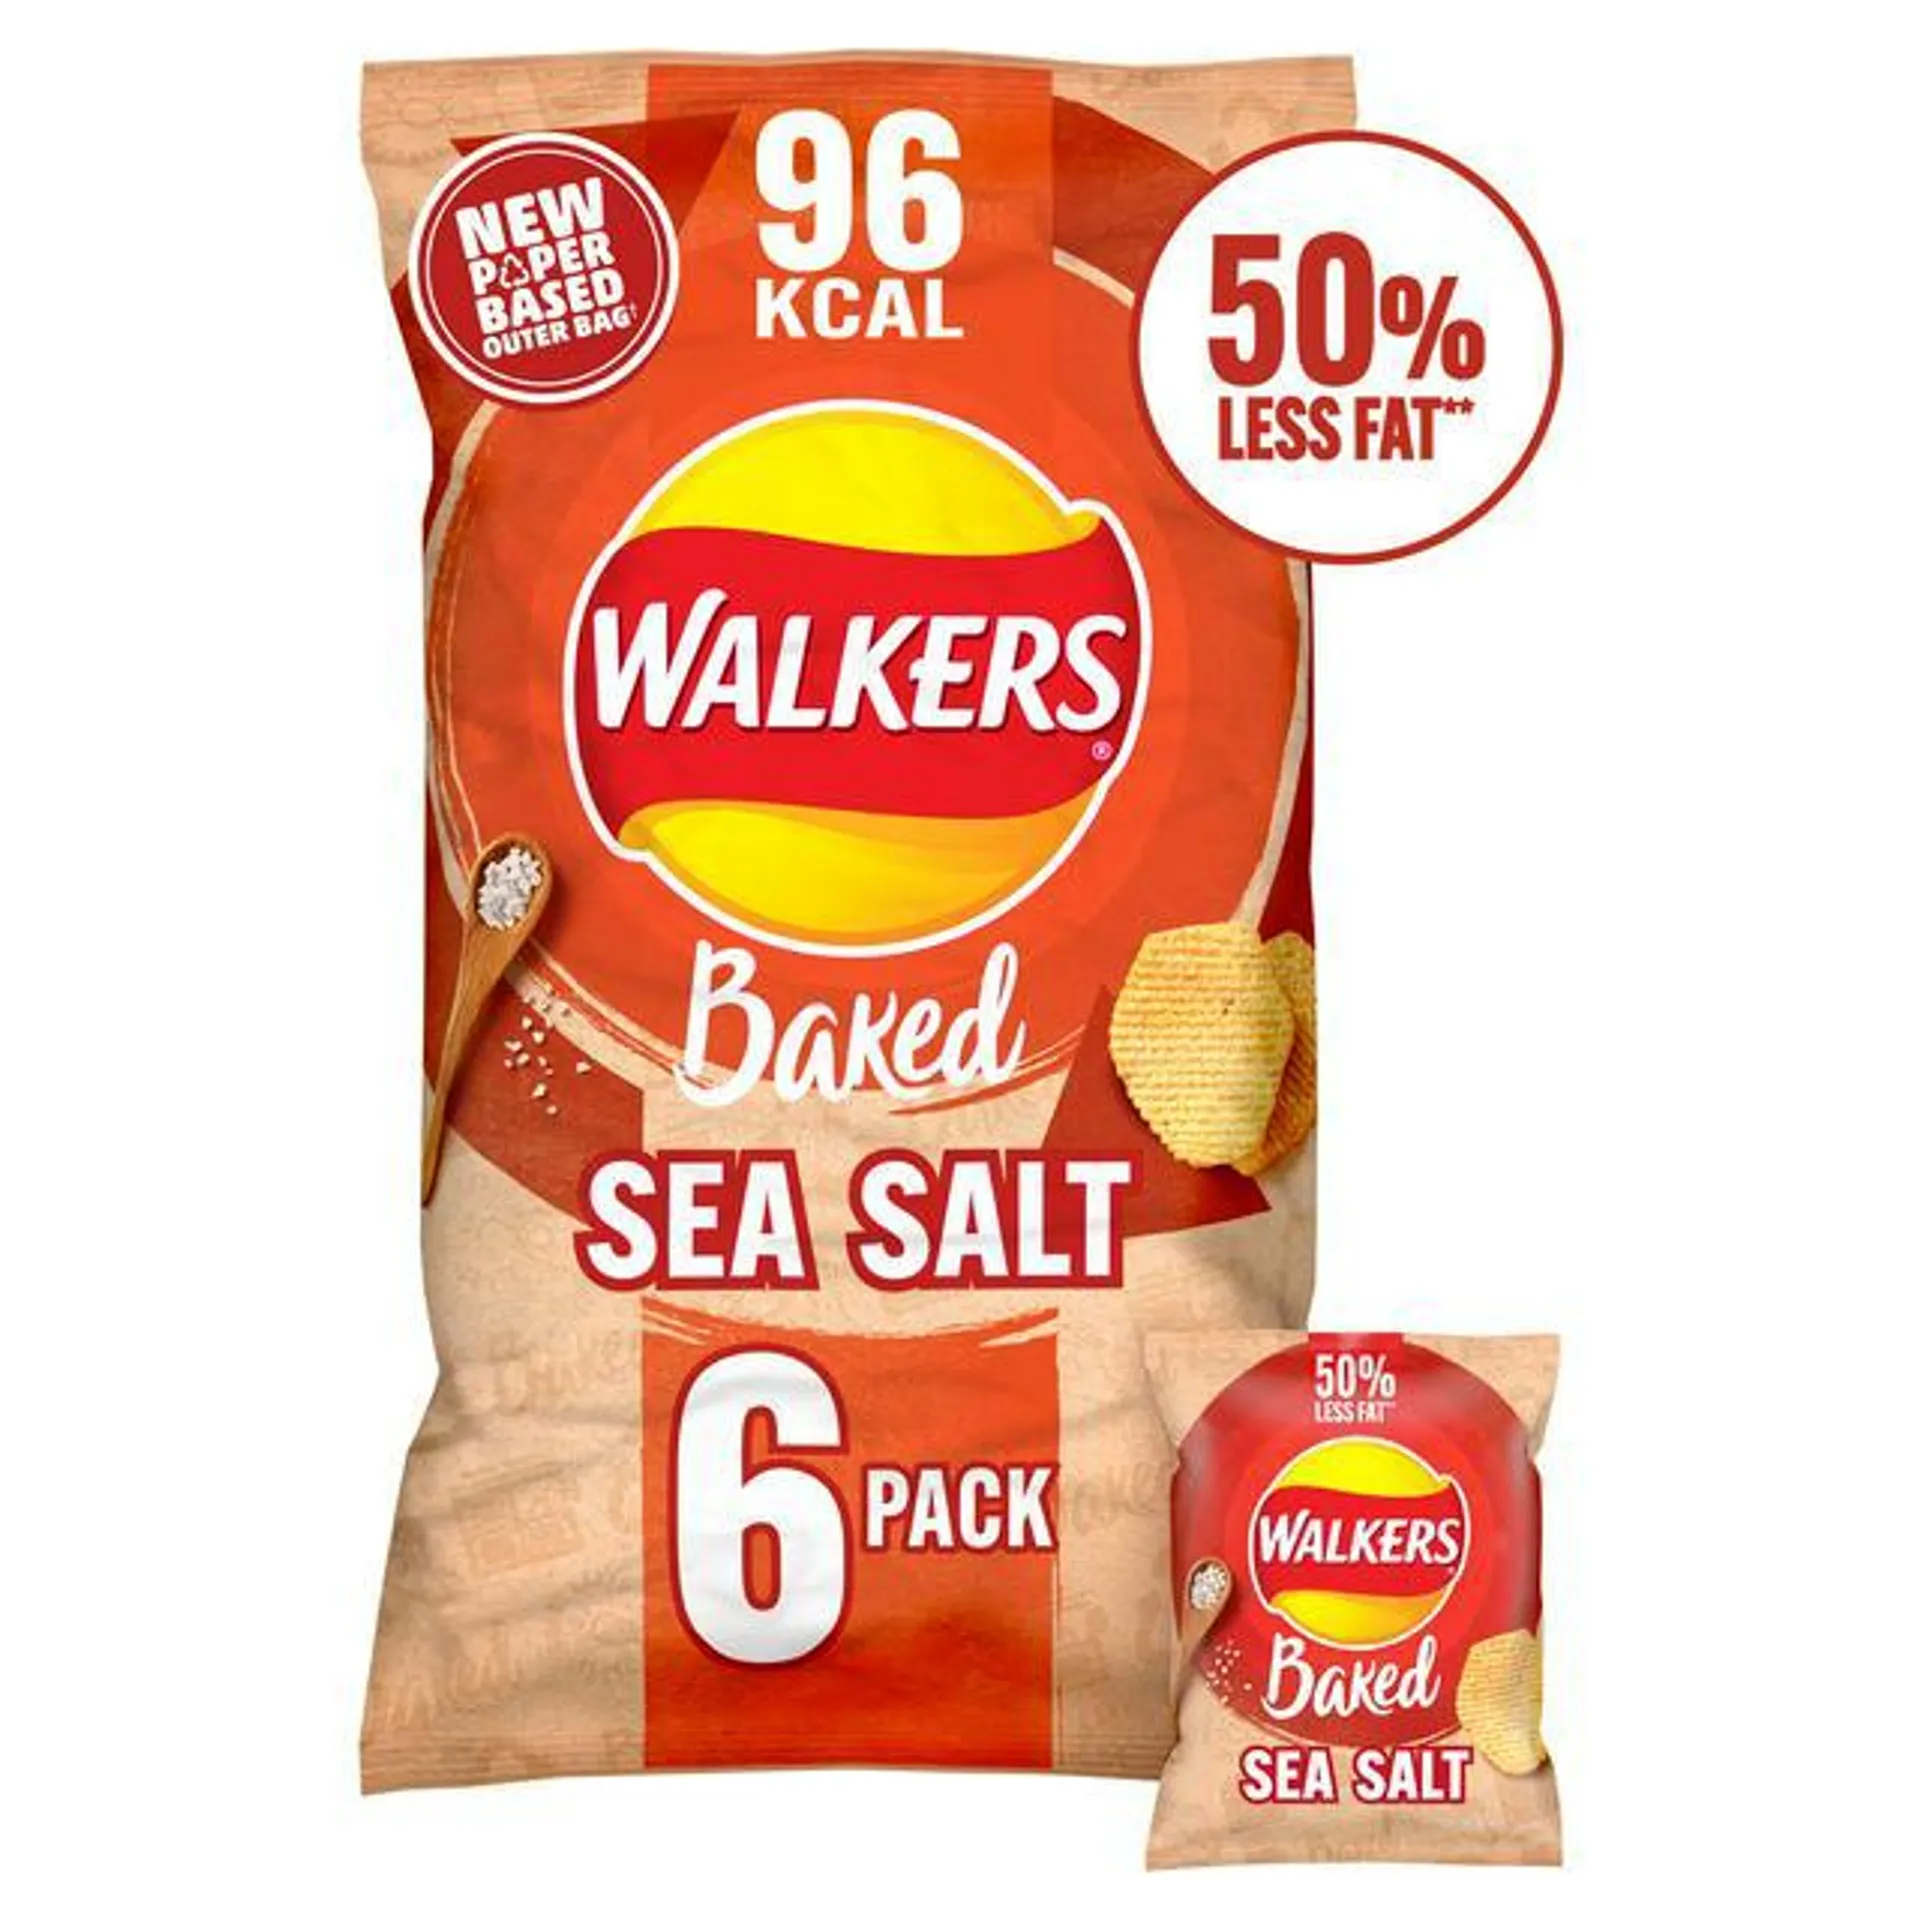 Walkers Baked Ready Salted Multipack Crisps Snacks 6x22g